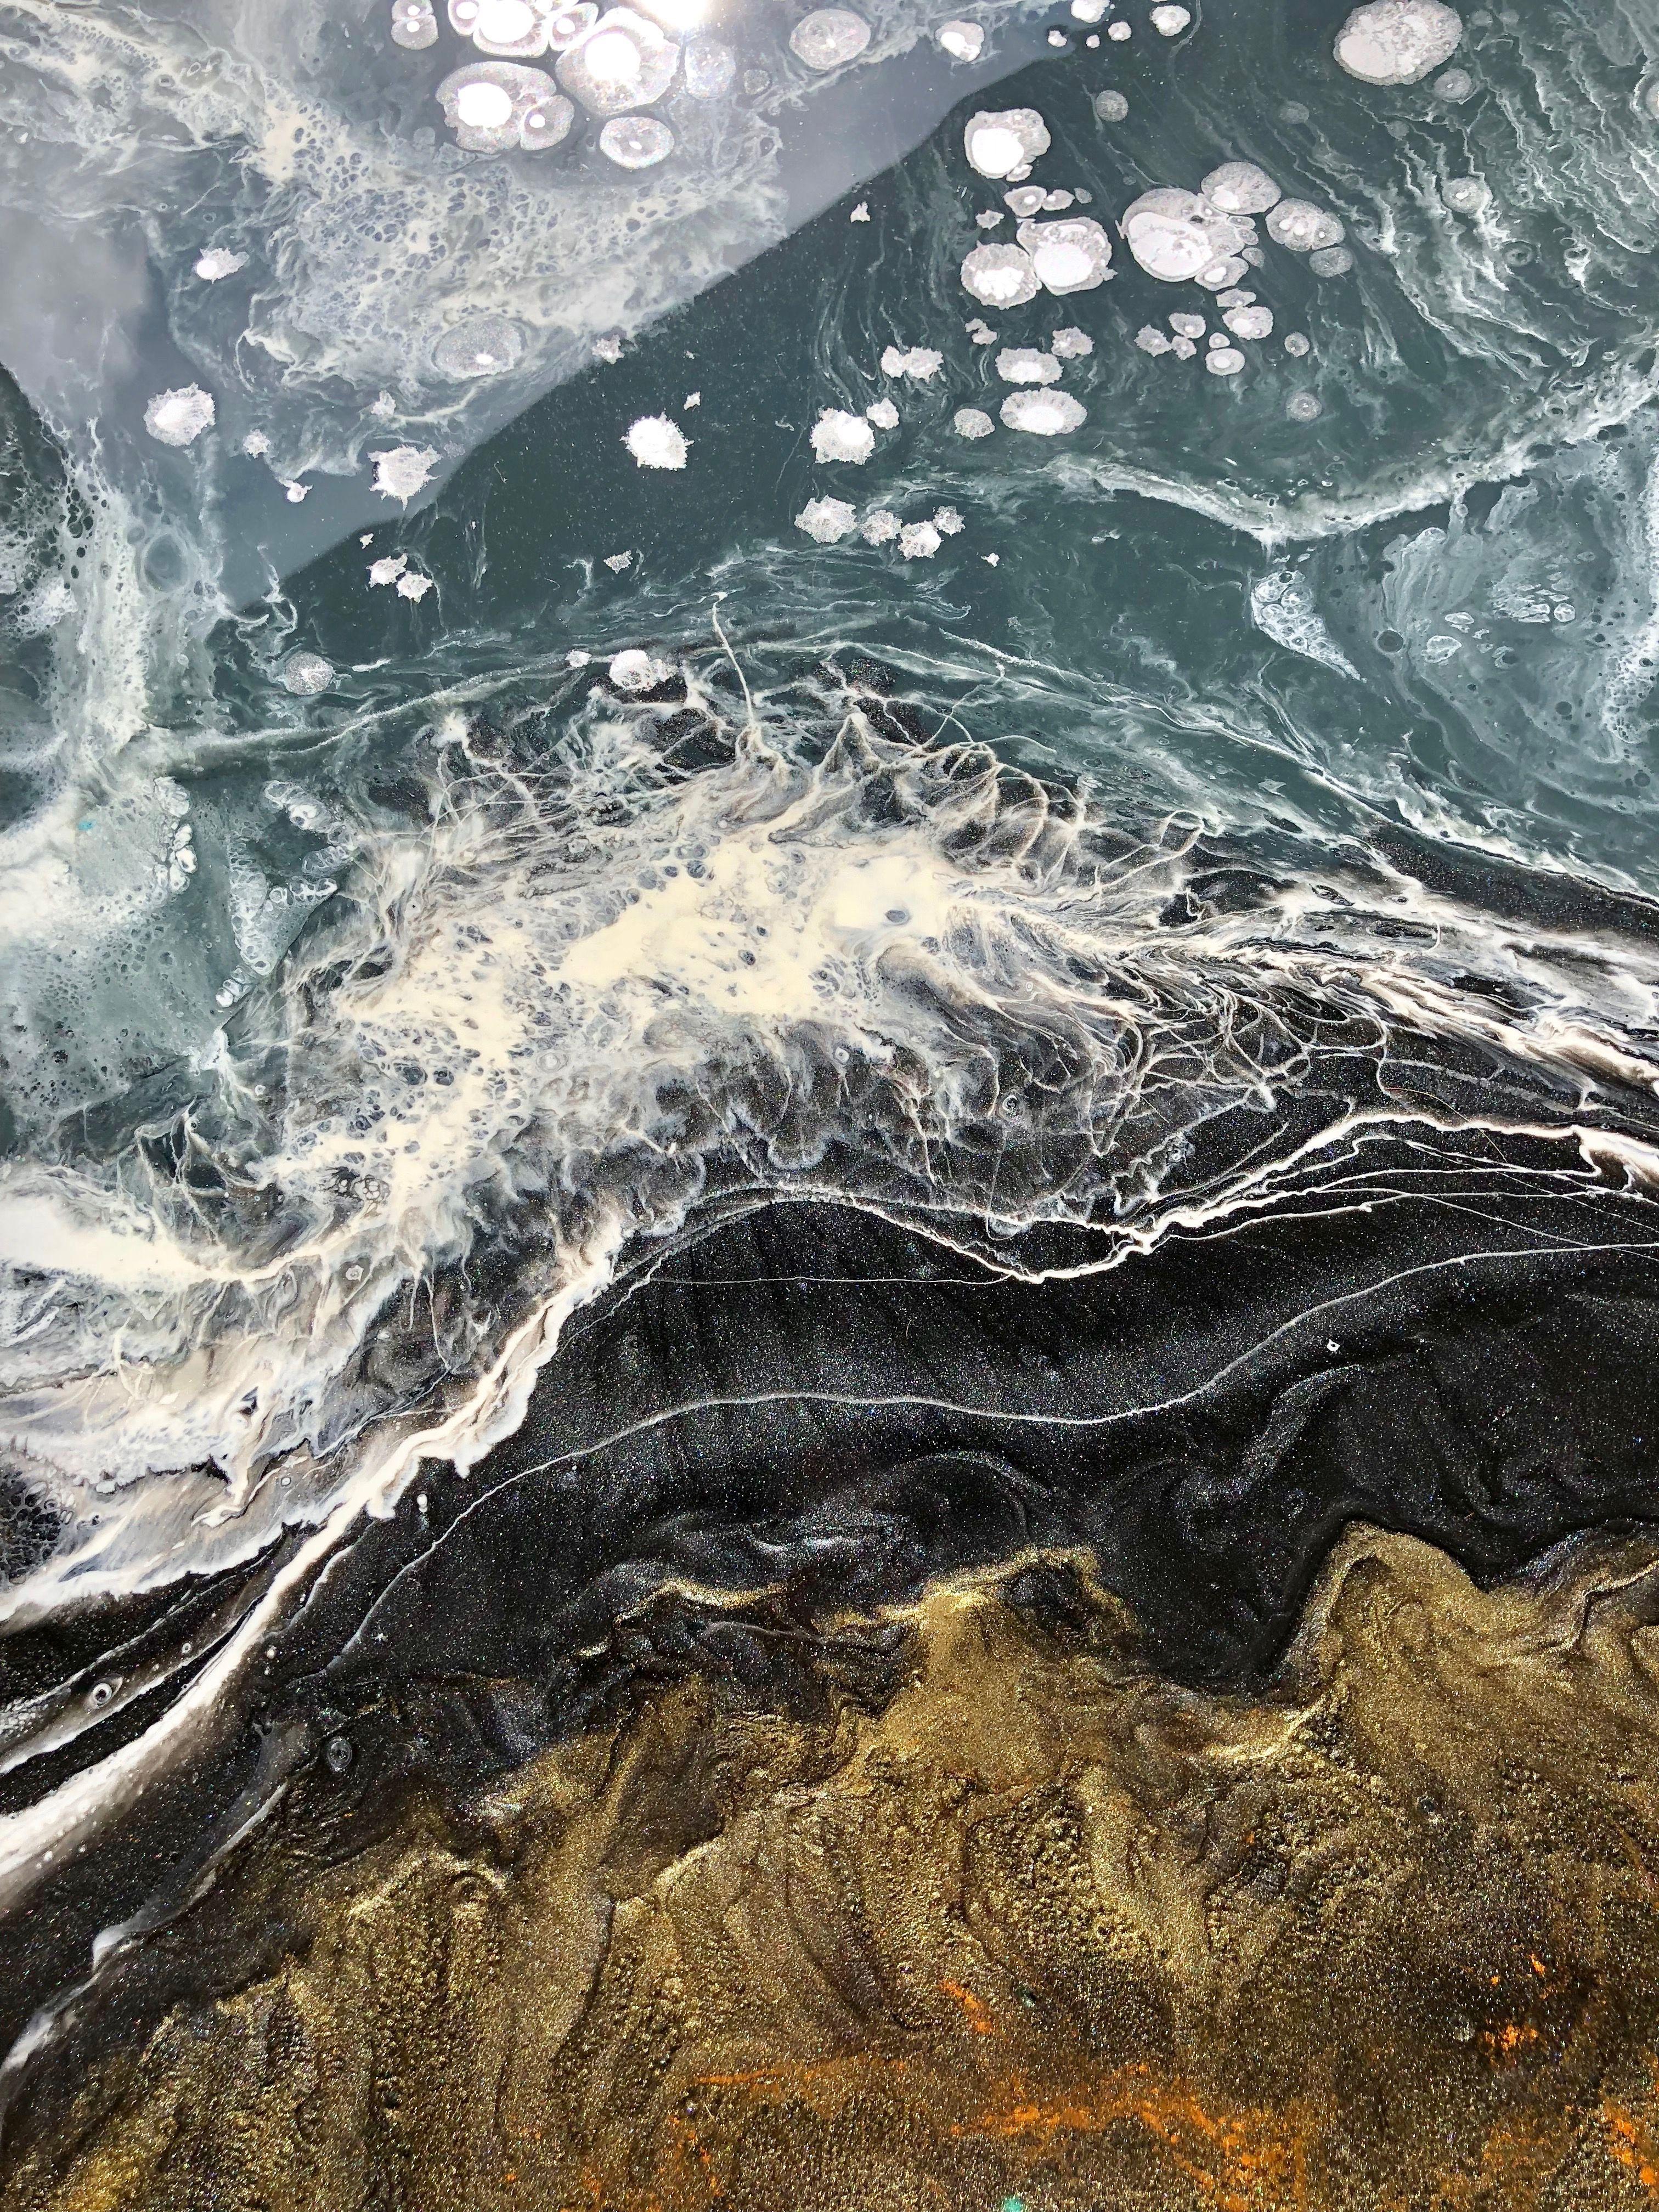 After getting a gorgeous gander at the Alaskan shoreline from the plane, I was inspired to make an abstract resin pour painting with that color scheme. Cold blue-grey waves wash up against coarse black sands with foaming tips and speckles of seafoam